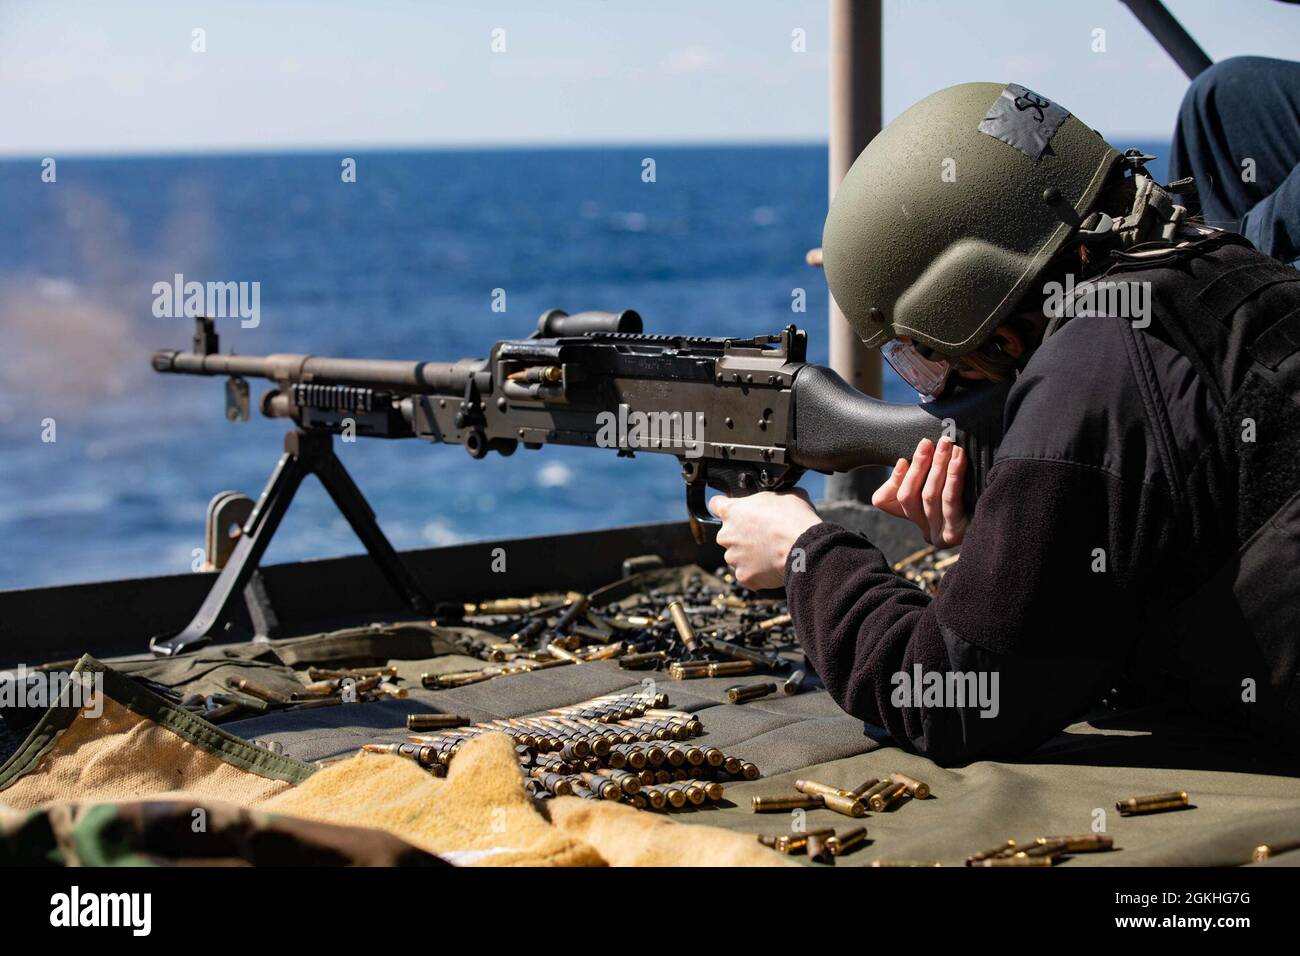 210423-N-VM474-1183 ATLANTIC OCEAN (April 23, 2021) Yeoman 3rd Class Hannah Smith fires an M240B machine gun during a live-fire qualification event aboard the Wasp-class amphibious assault ship USS Kearsarge (LHD 3) April 23, 2021. Kearsarge, homeported at Naval Station Norfolk, is underway to certify for operations at sea. Stock Photo